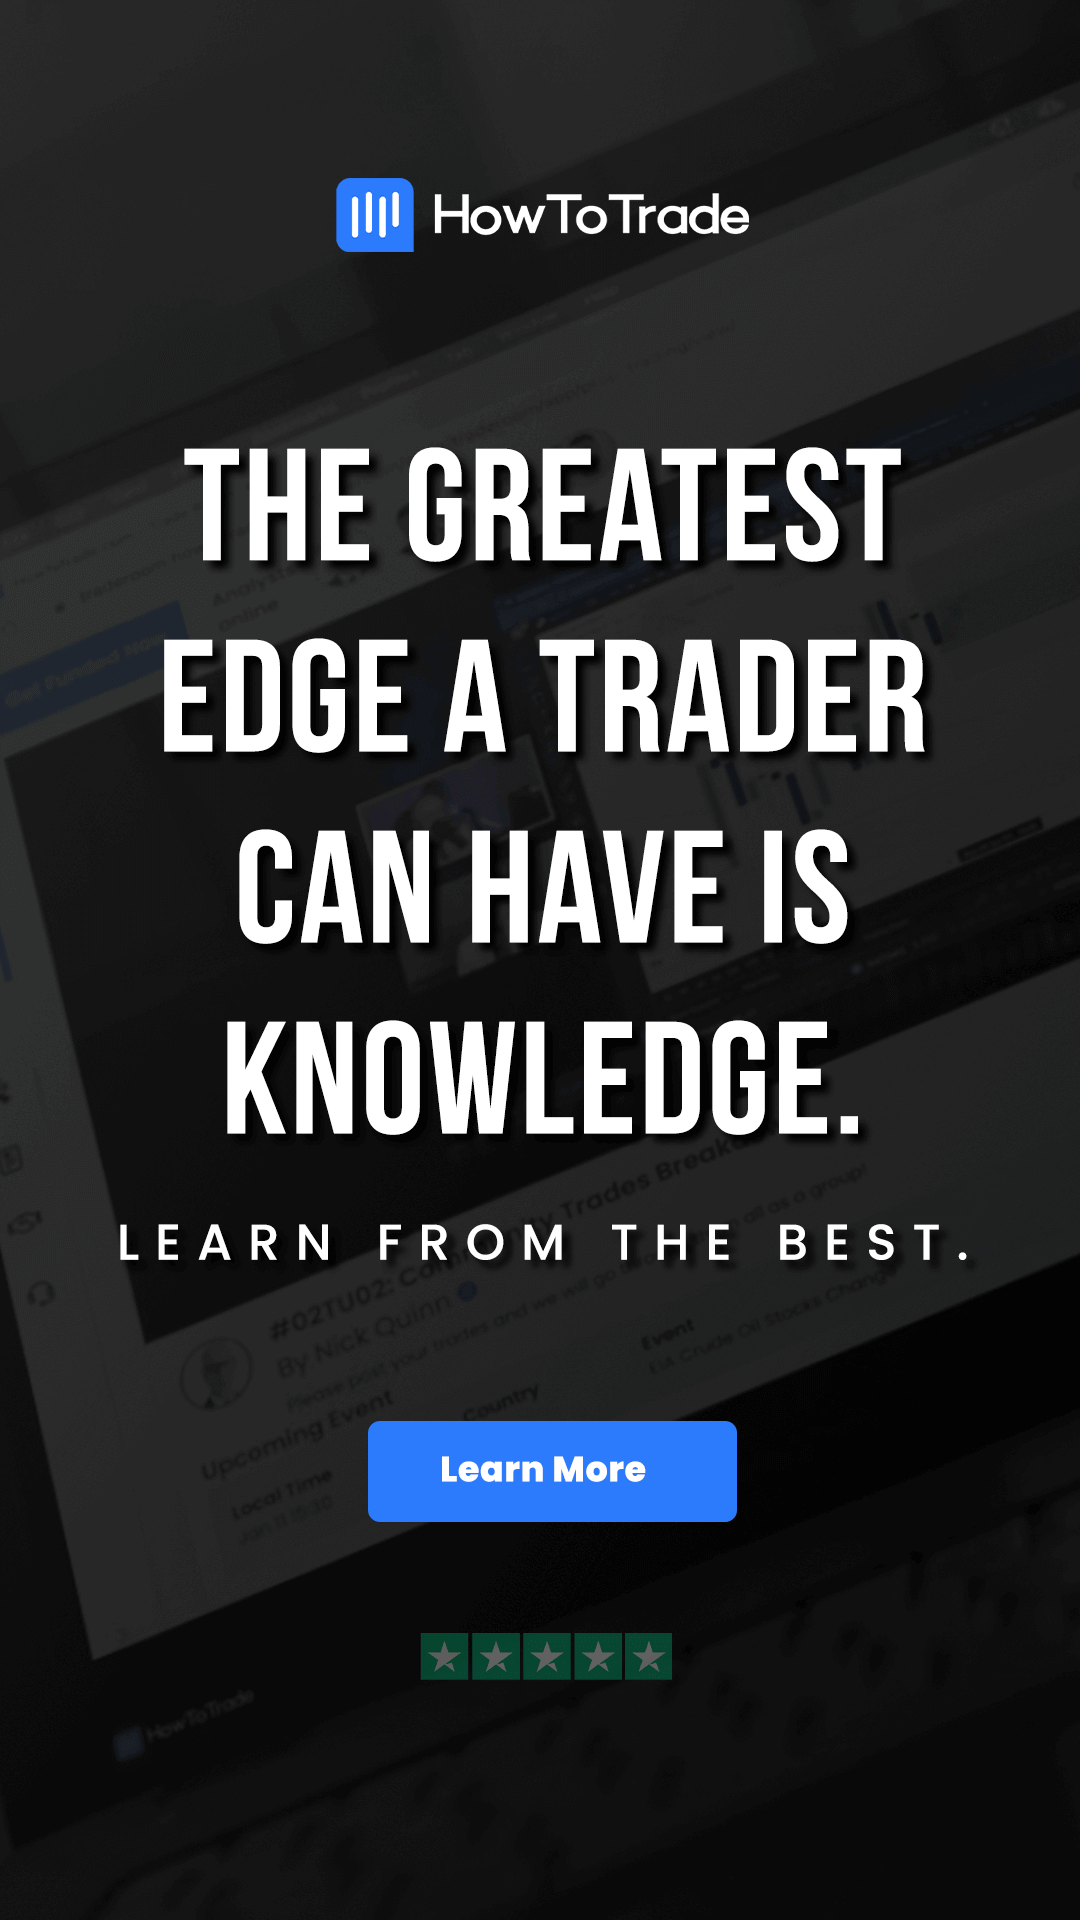 The greatest edge a trader can have is knowledge